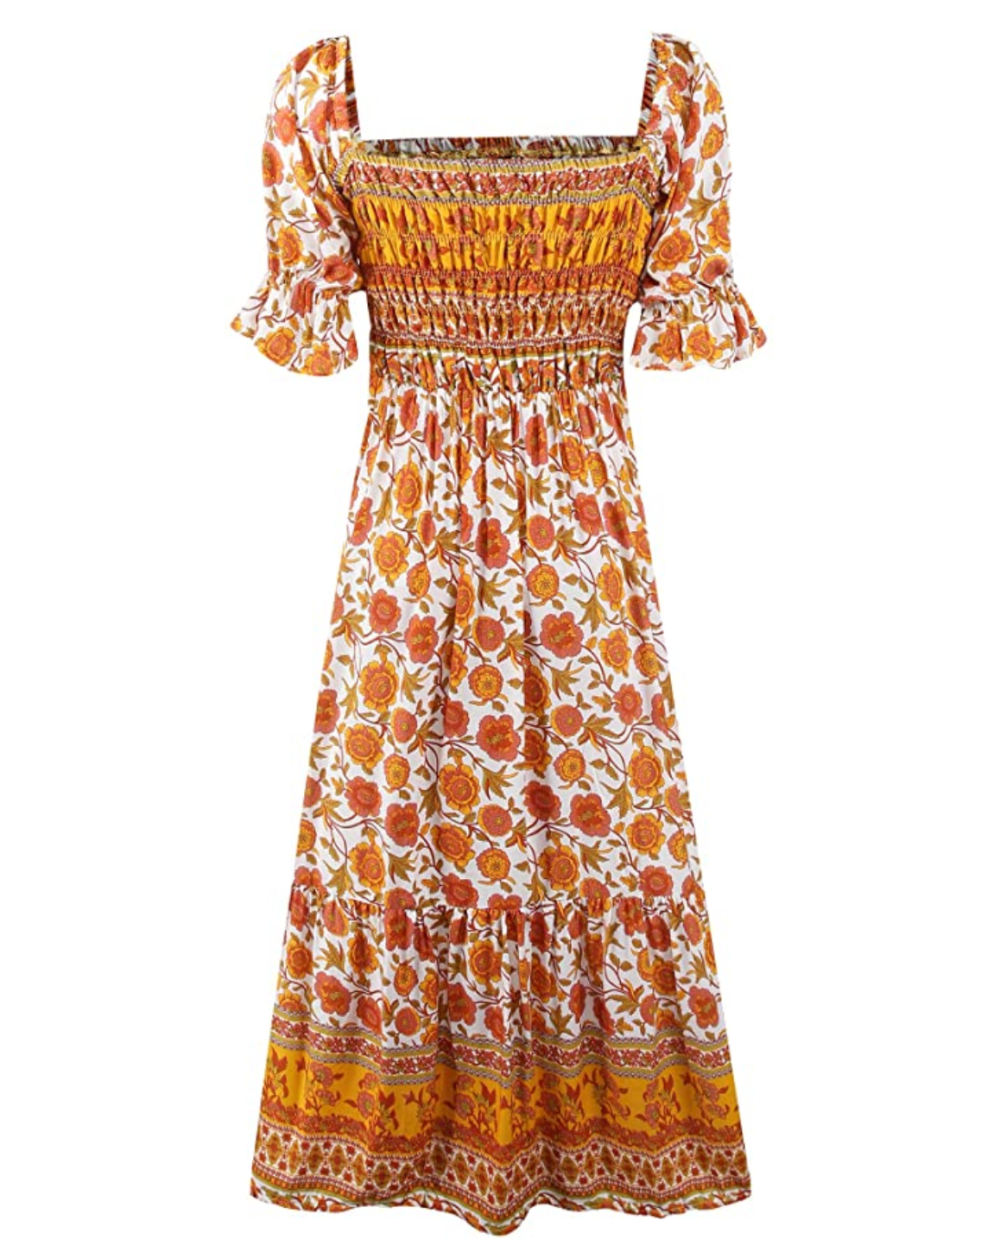 Uimlk Midi Dress Is a Boho Frock That You Can Wear Well Into Fall | Us ...